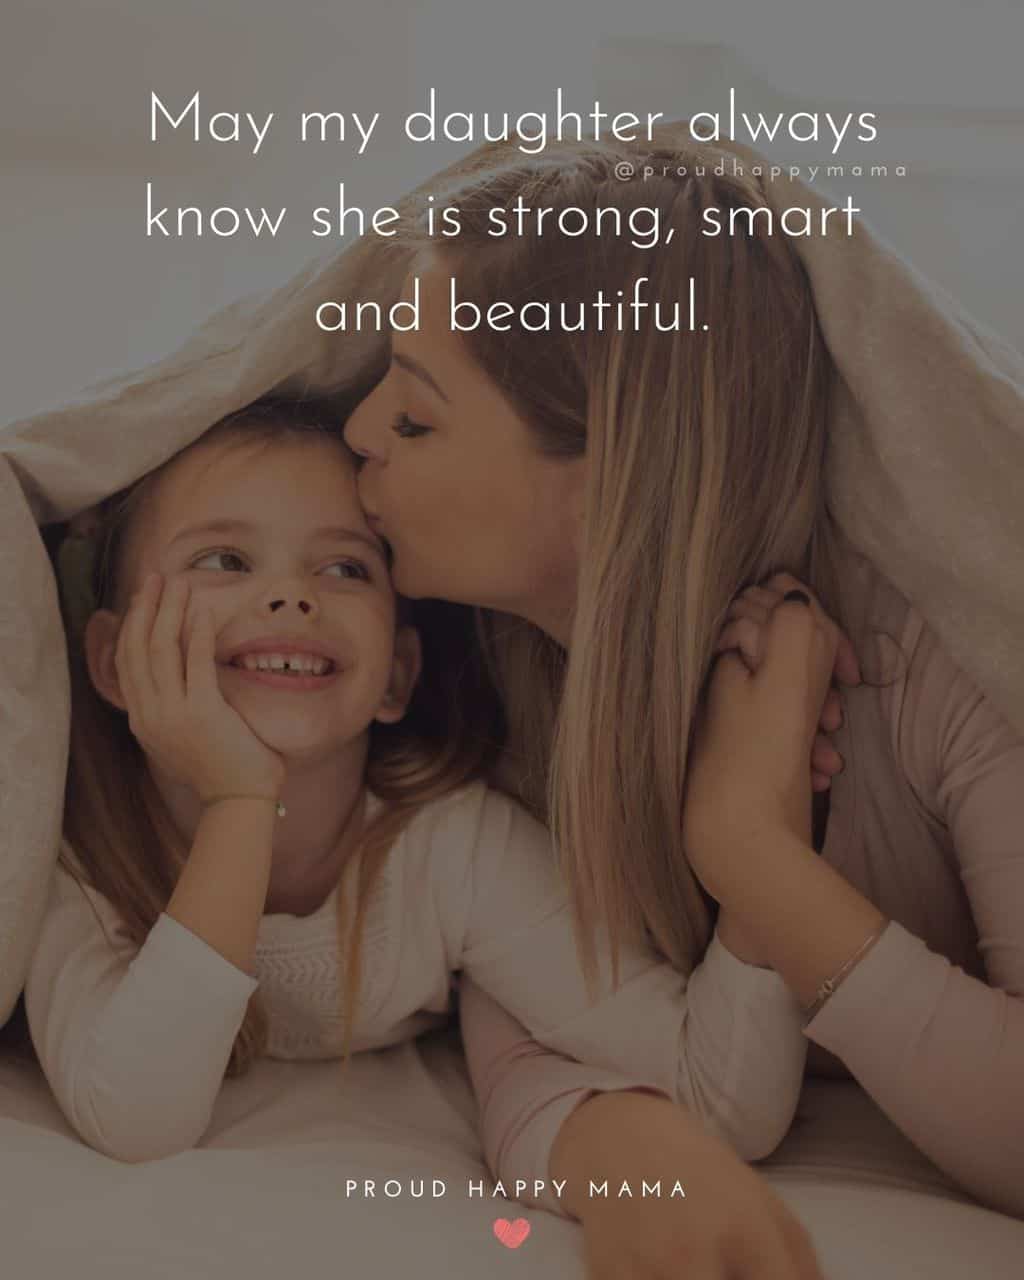 short quotes for my daughter - ‘May my daughter always know she is strong, smart and beautiful.’